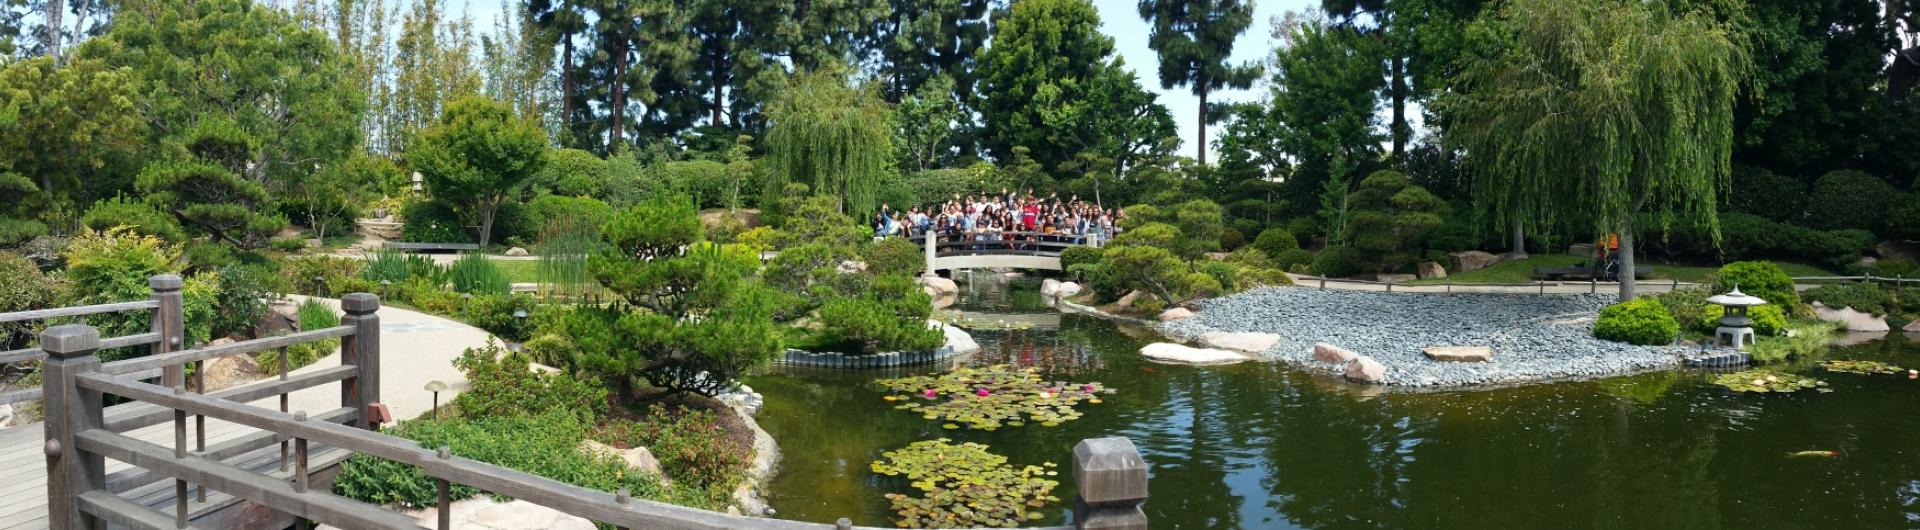 A school group visits the Japanese Garden